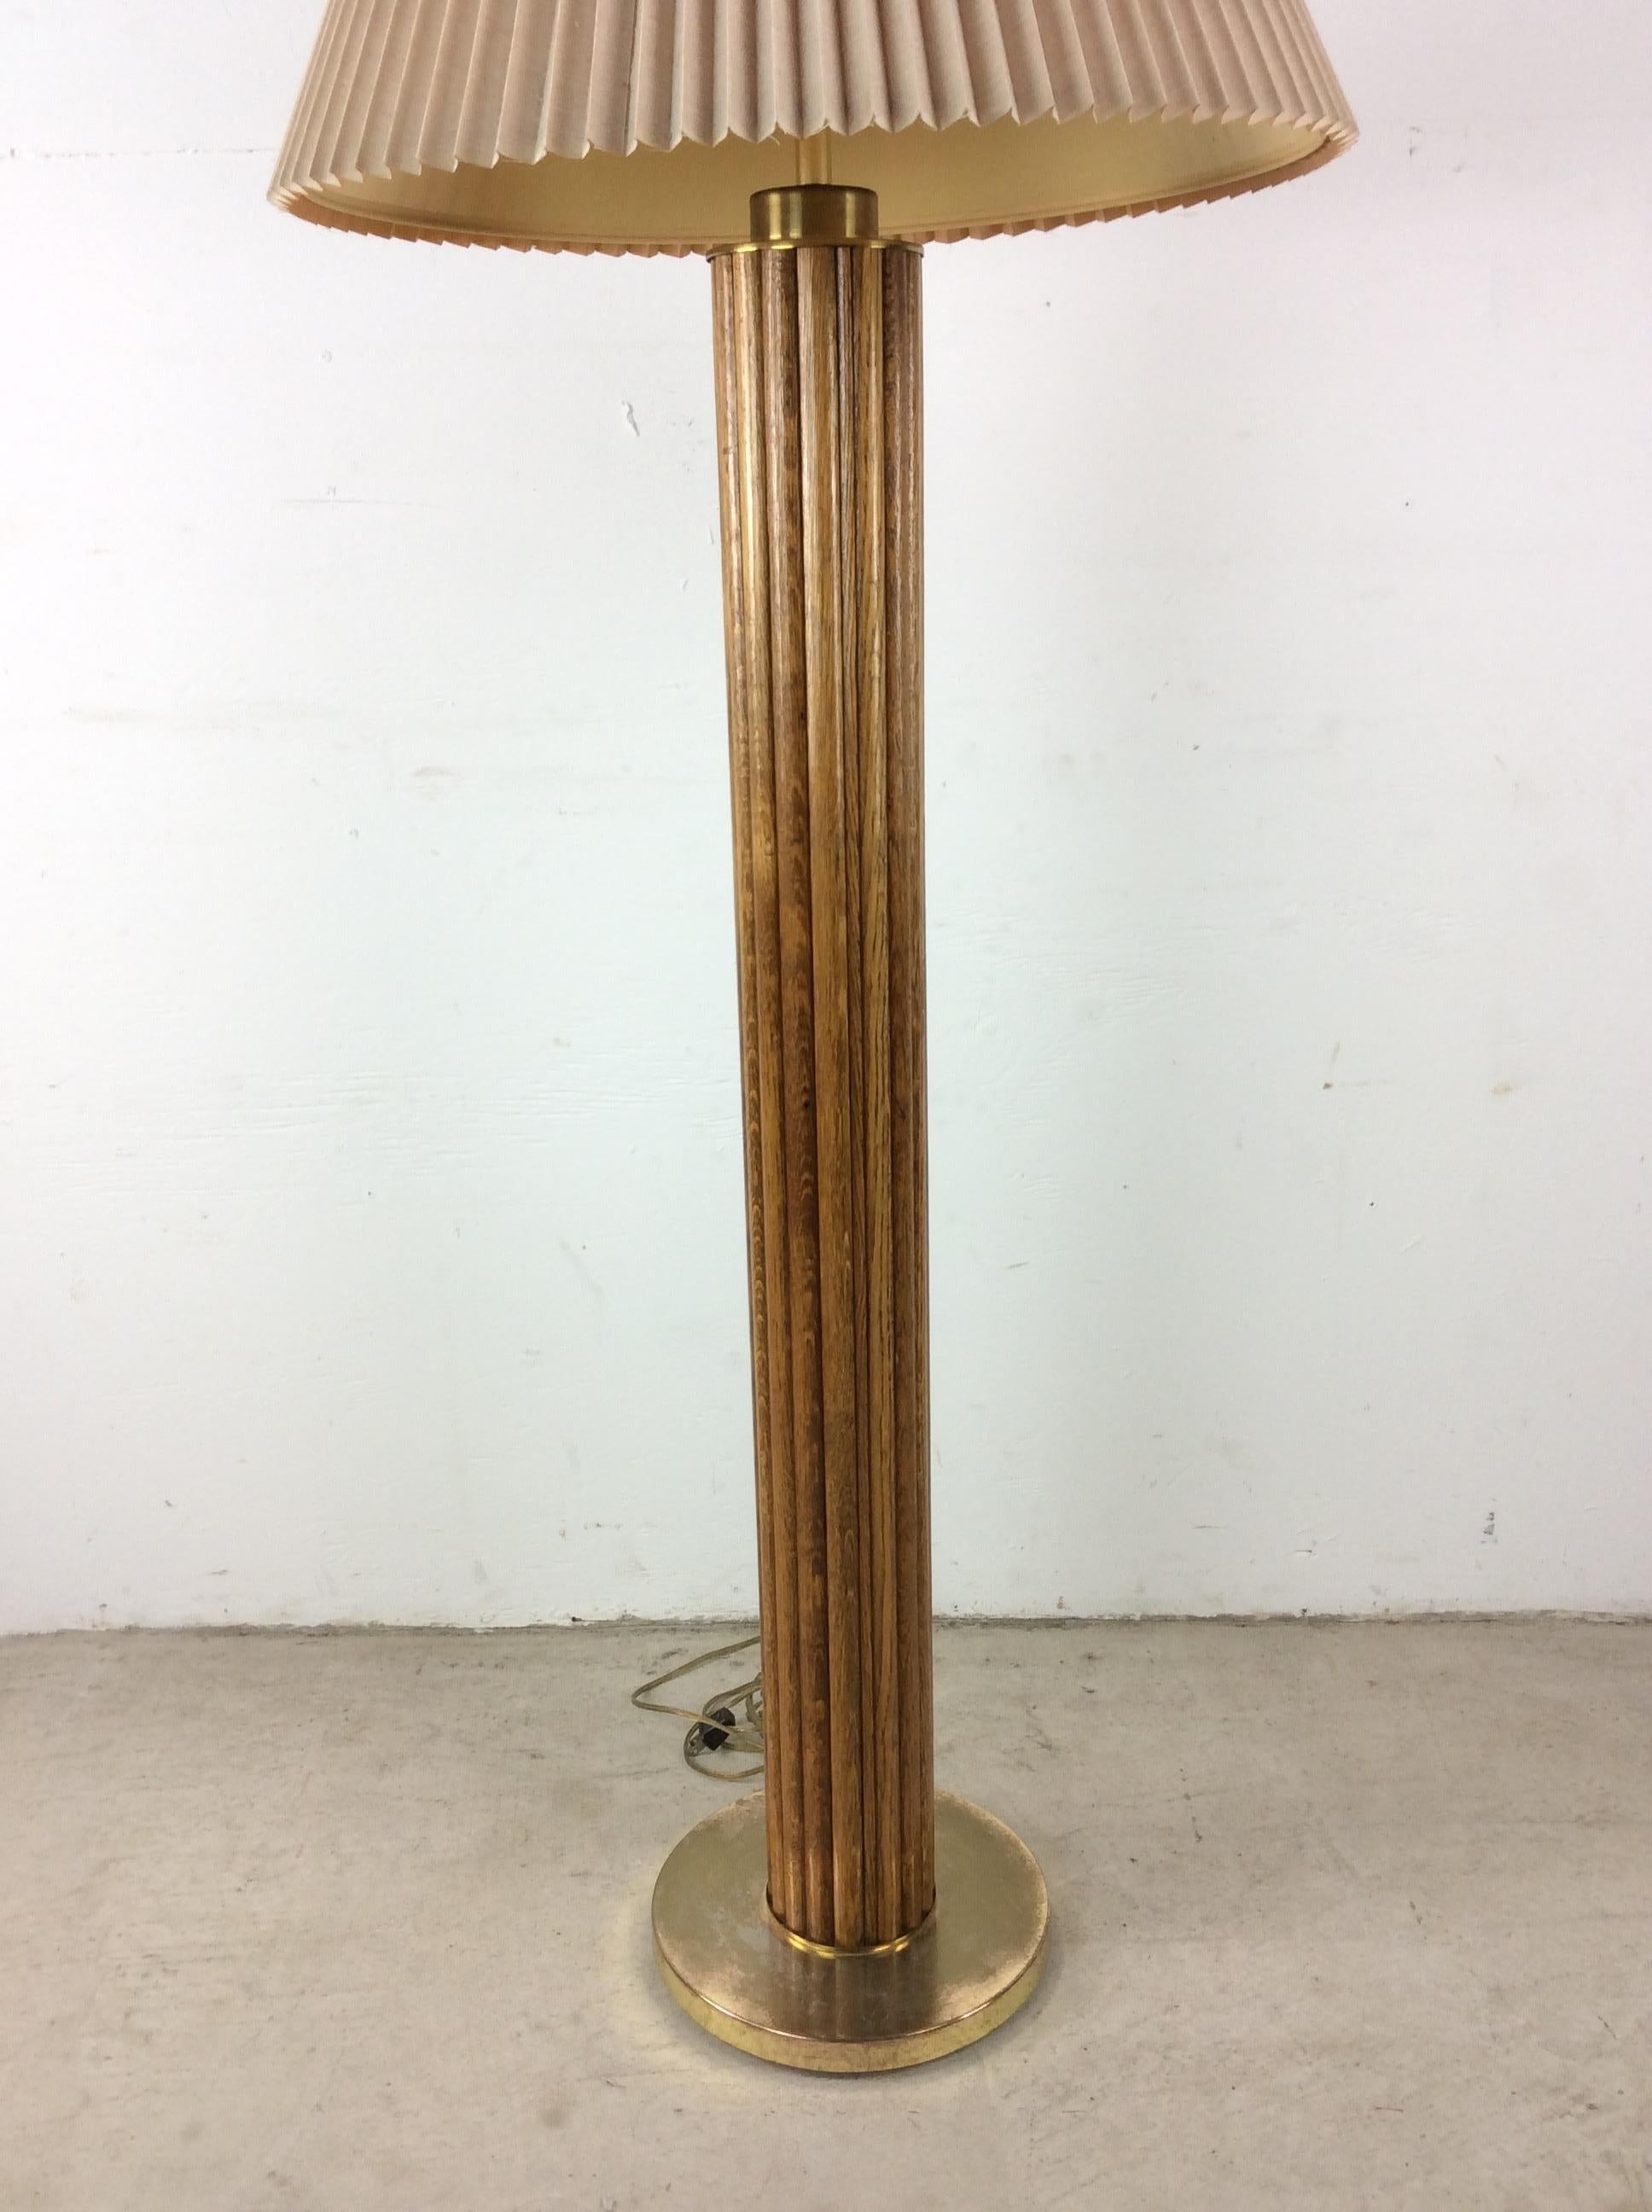 This vintage floor Bohemian style lamp features beautiful oak stained rattan body with brass accented base and pleated shade.  Measurements are with shade included. Base measures 11w 11d 59h

Dimensions: 21w 21d 59h

Condition: Vintage wiring is